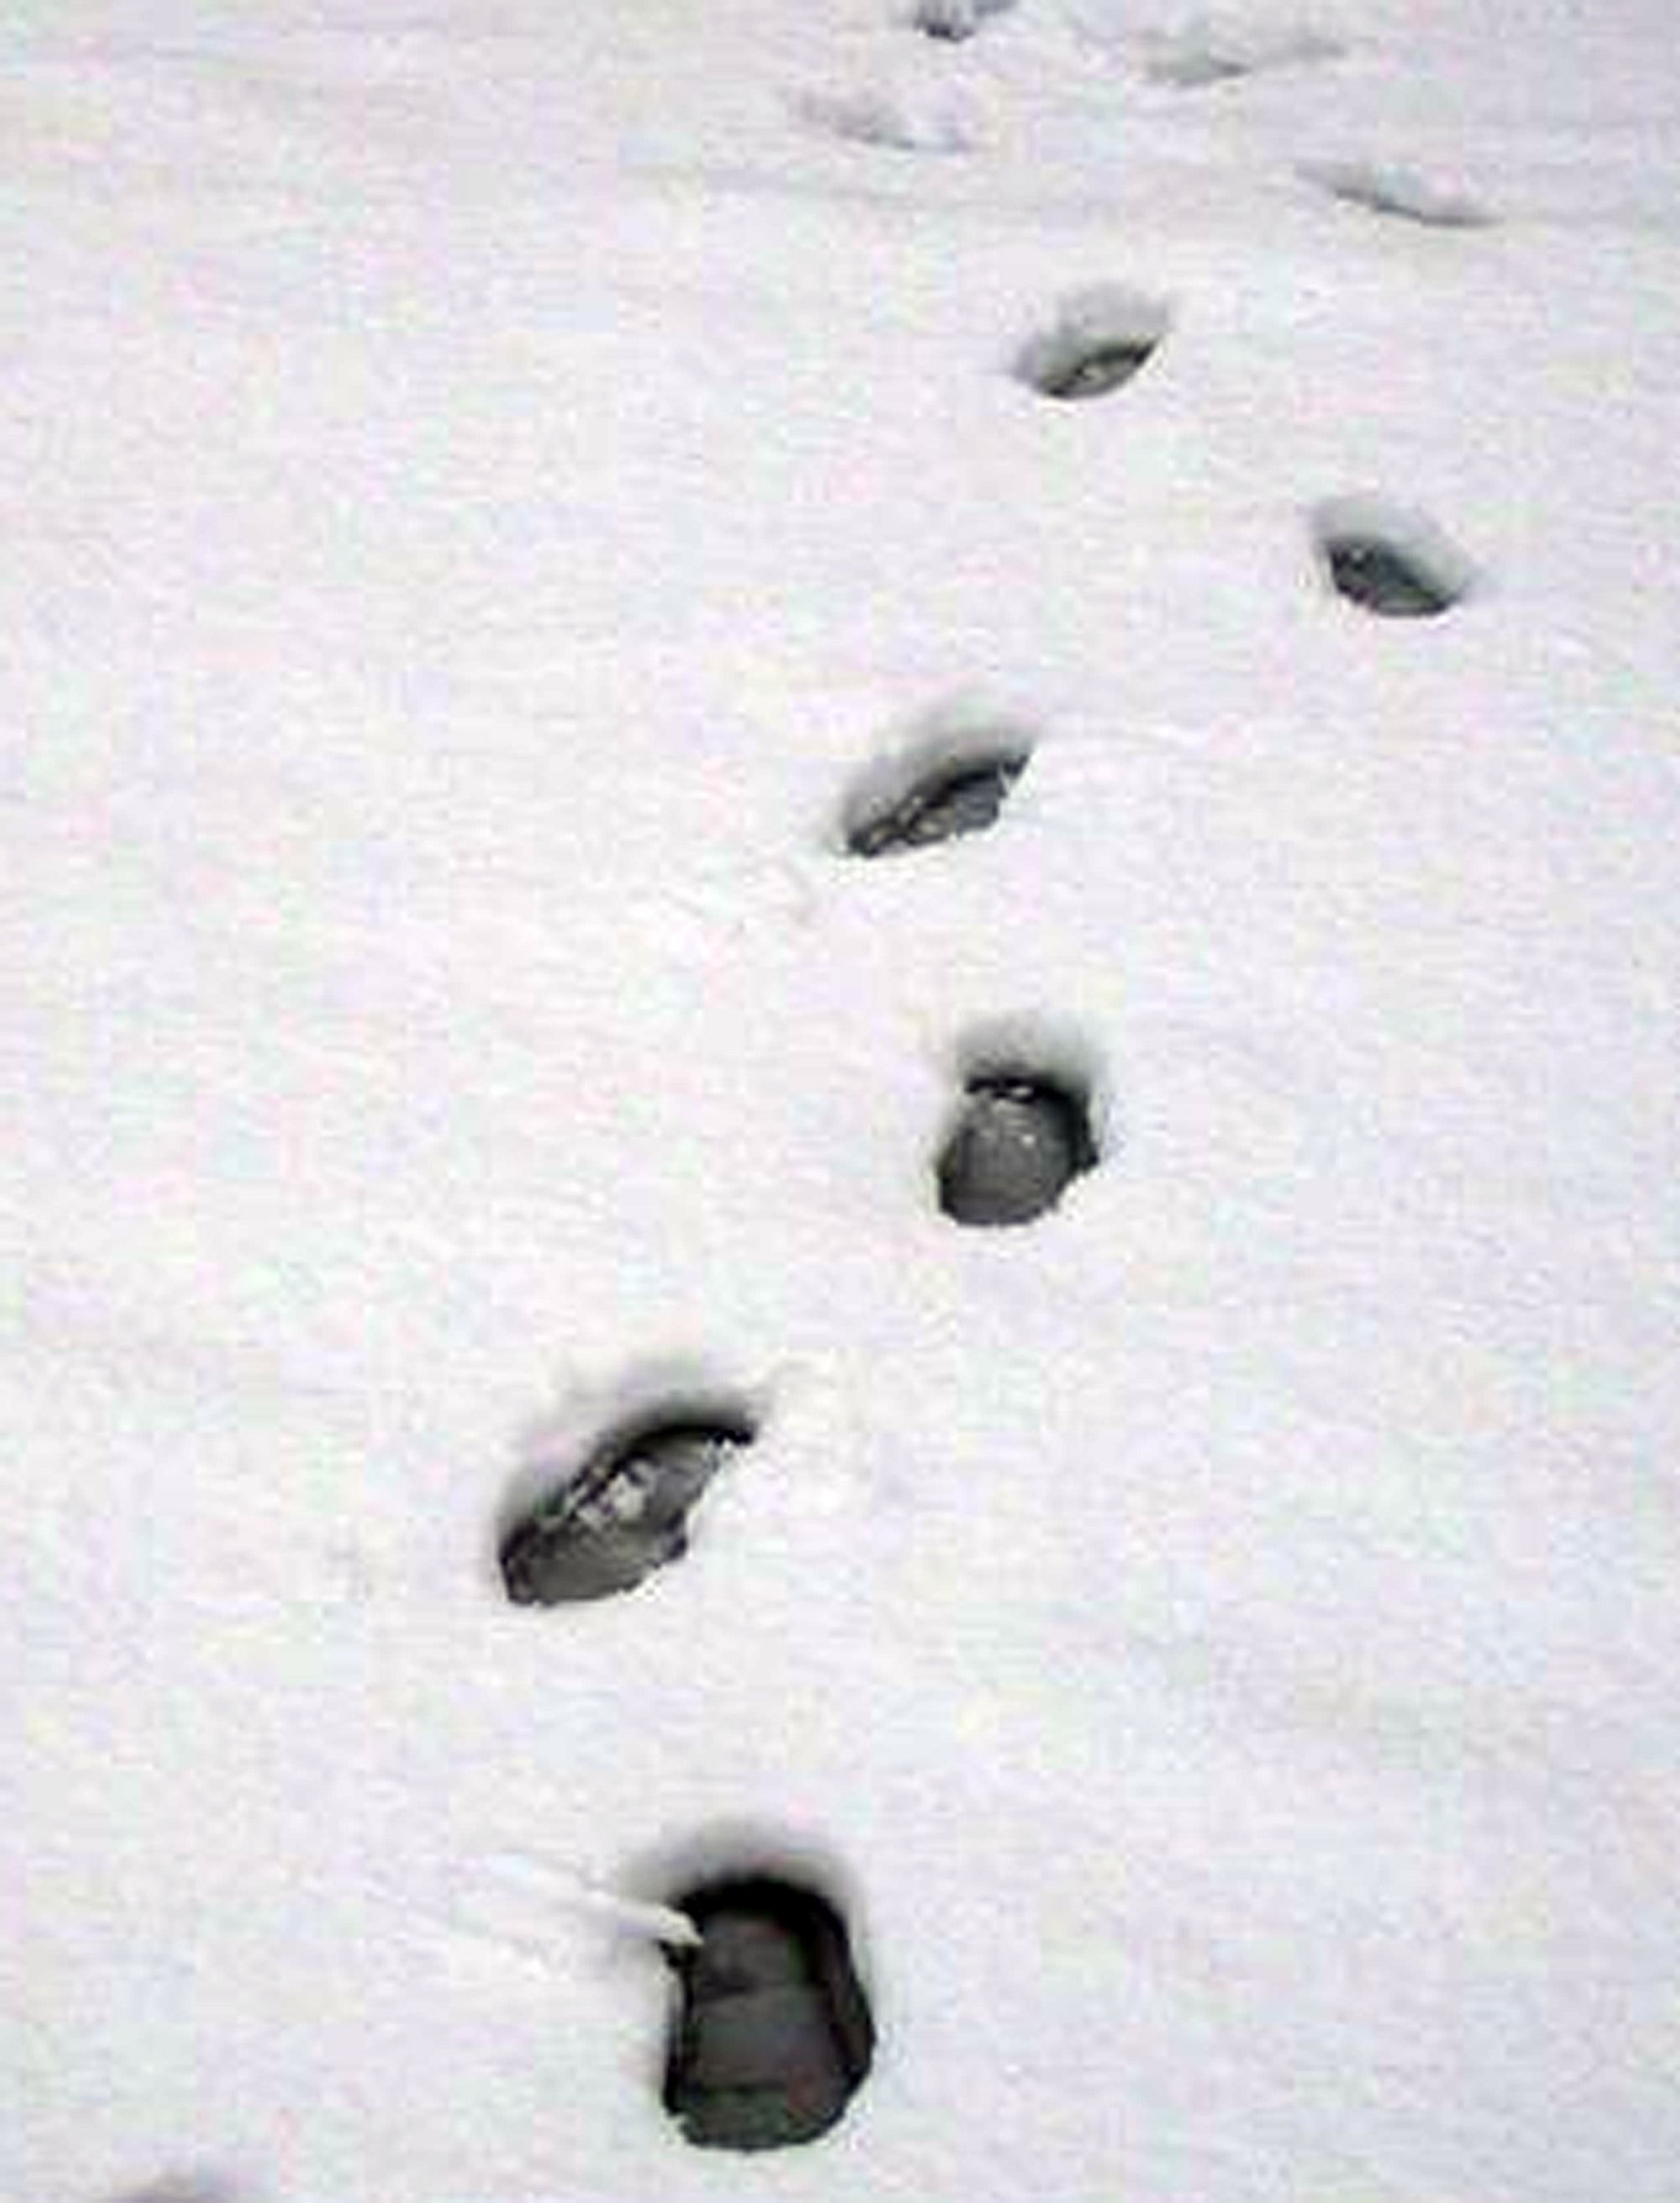 Car Burglar Busted After Cops Track Footprints In The Snow